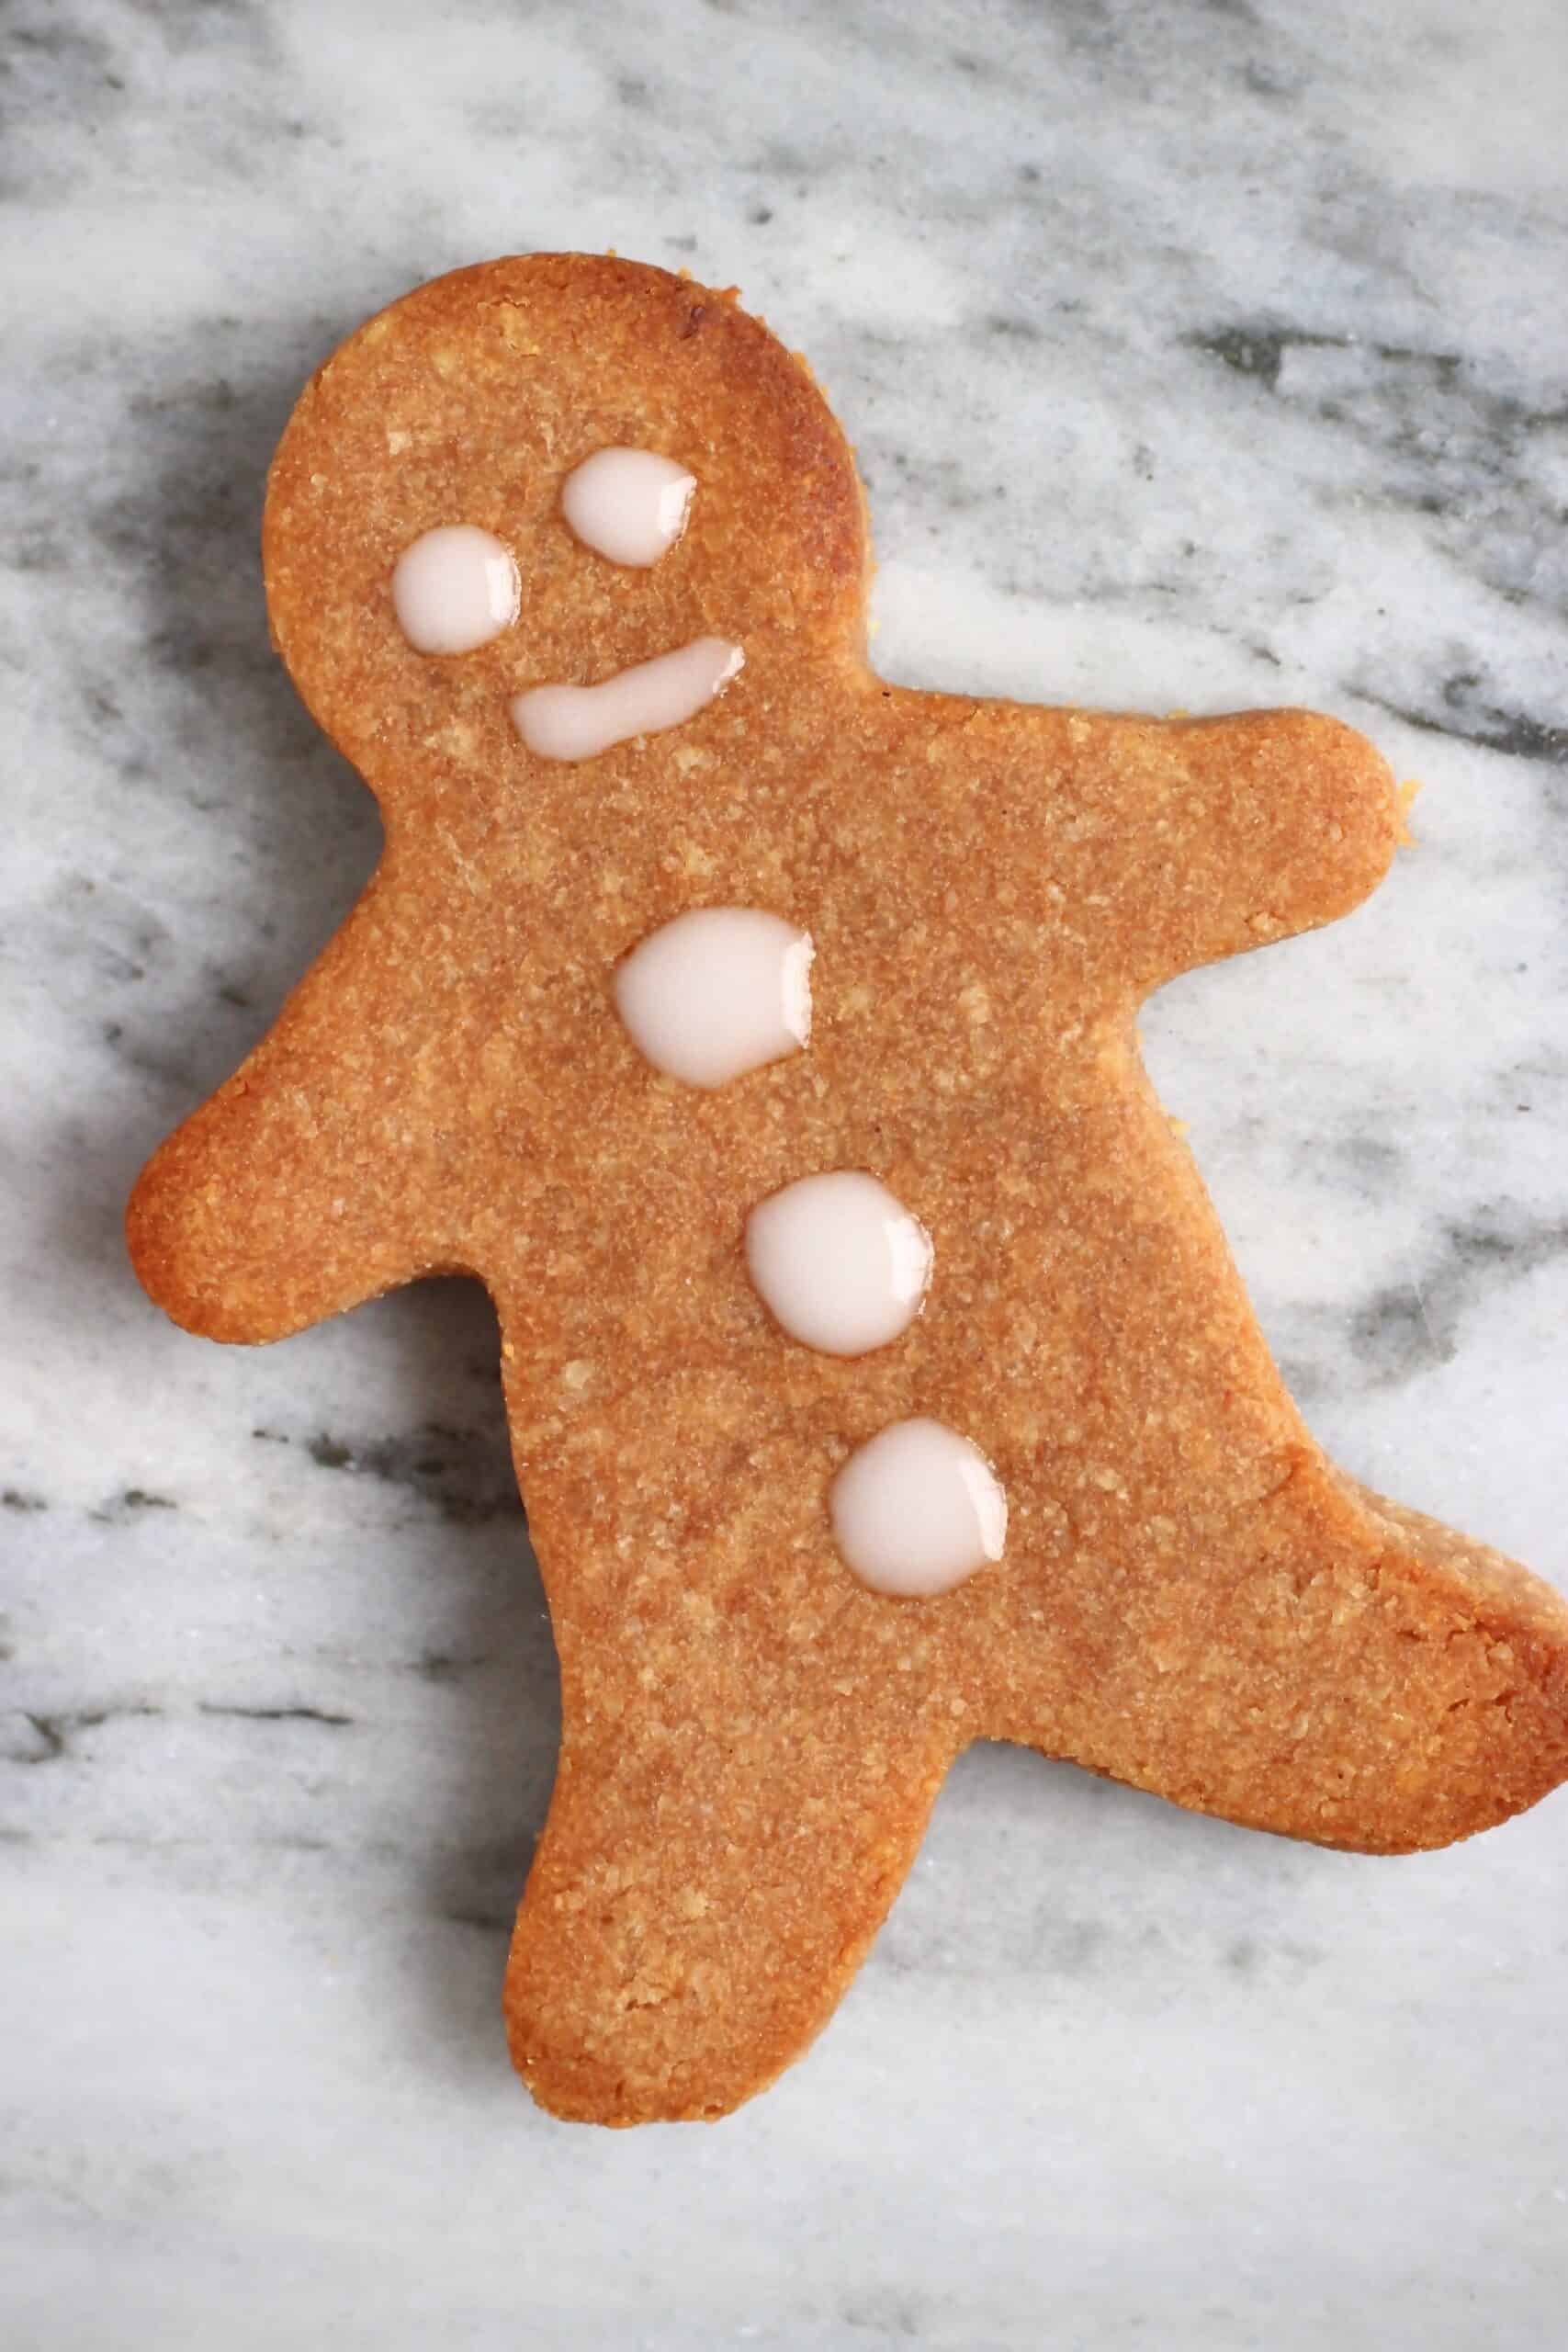 A gluten-free vegan gingerbread cookie on a marble background